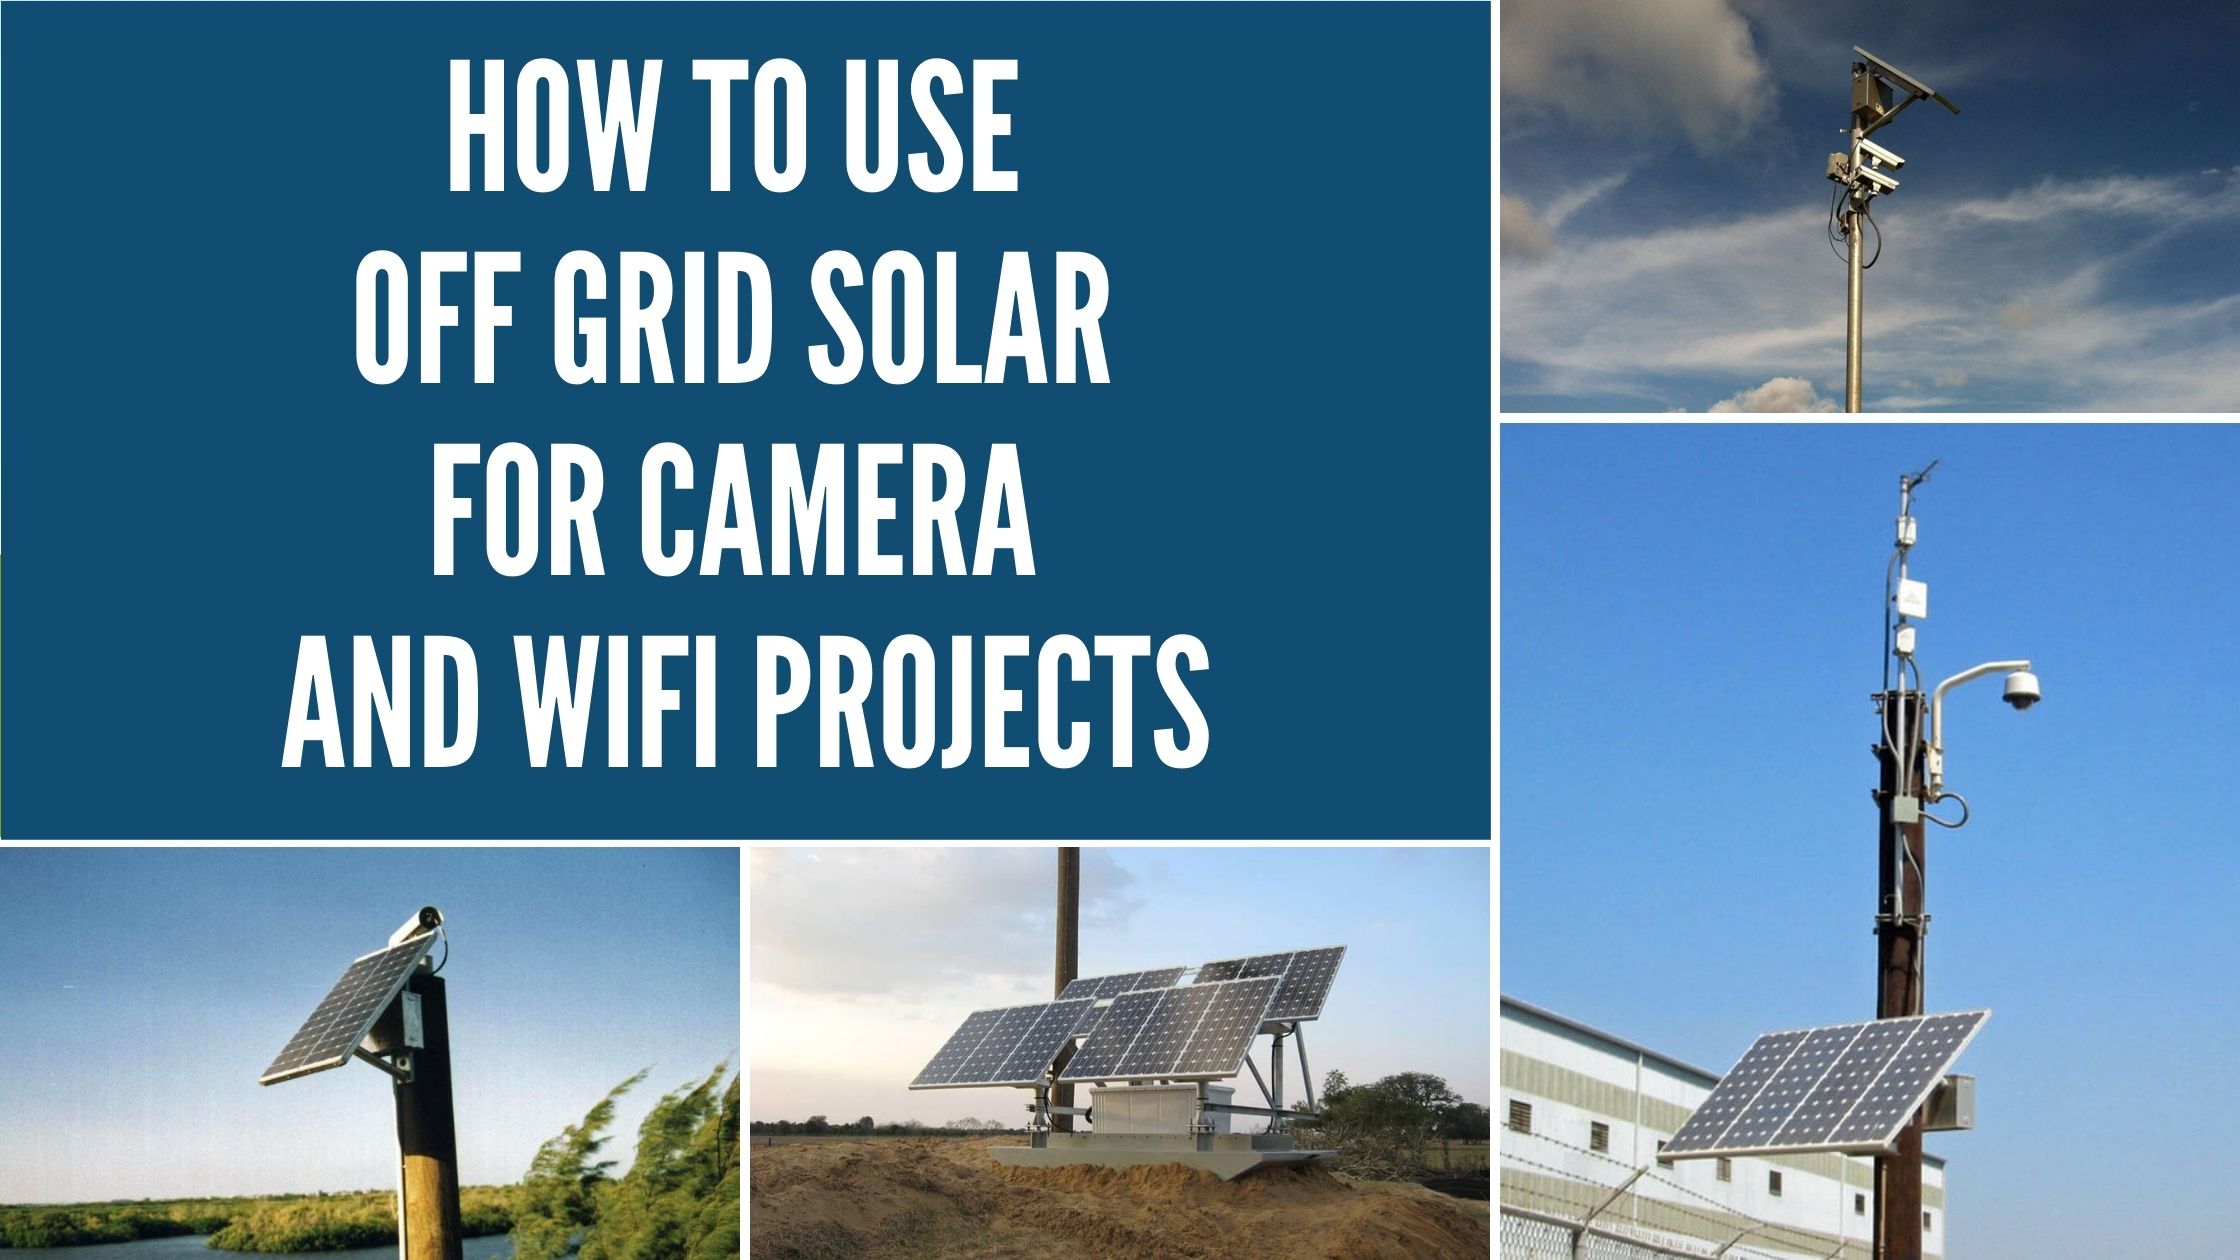 How To Use Off Grid Solar for Camera and WiFi Projects